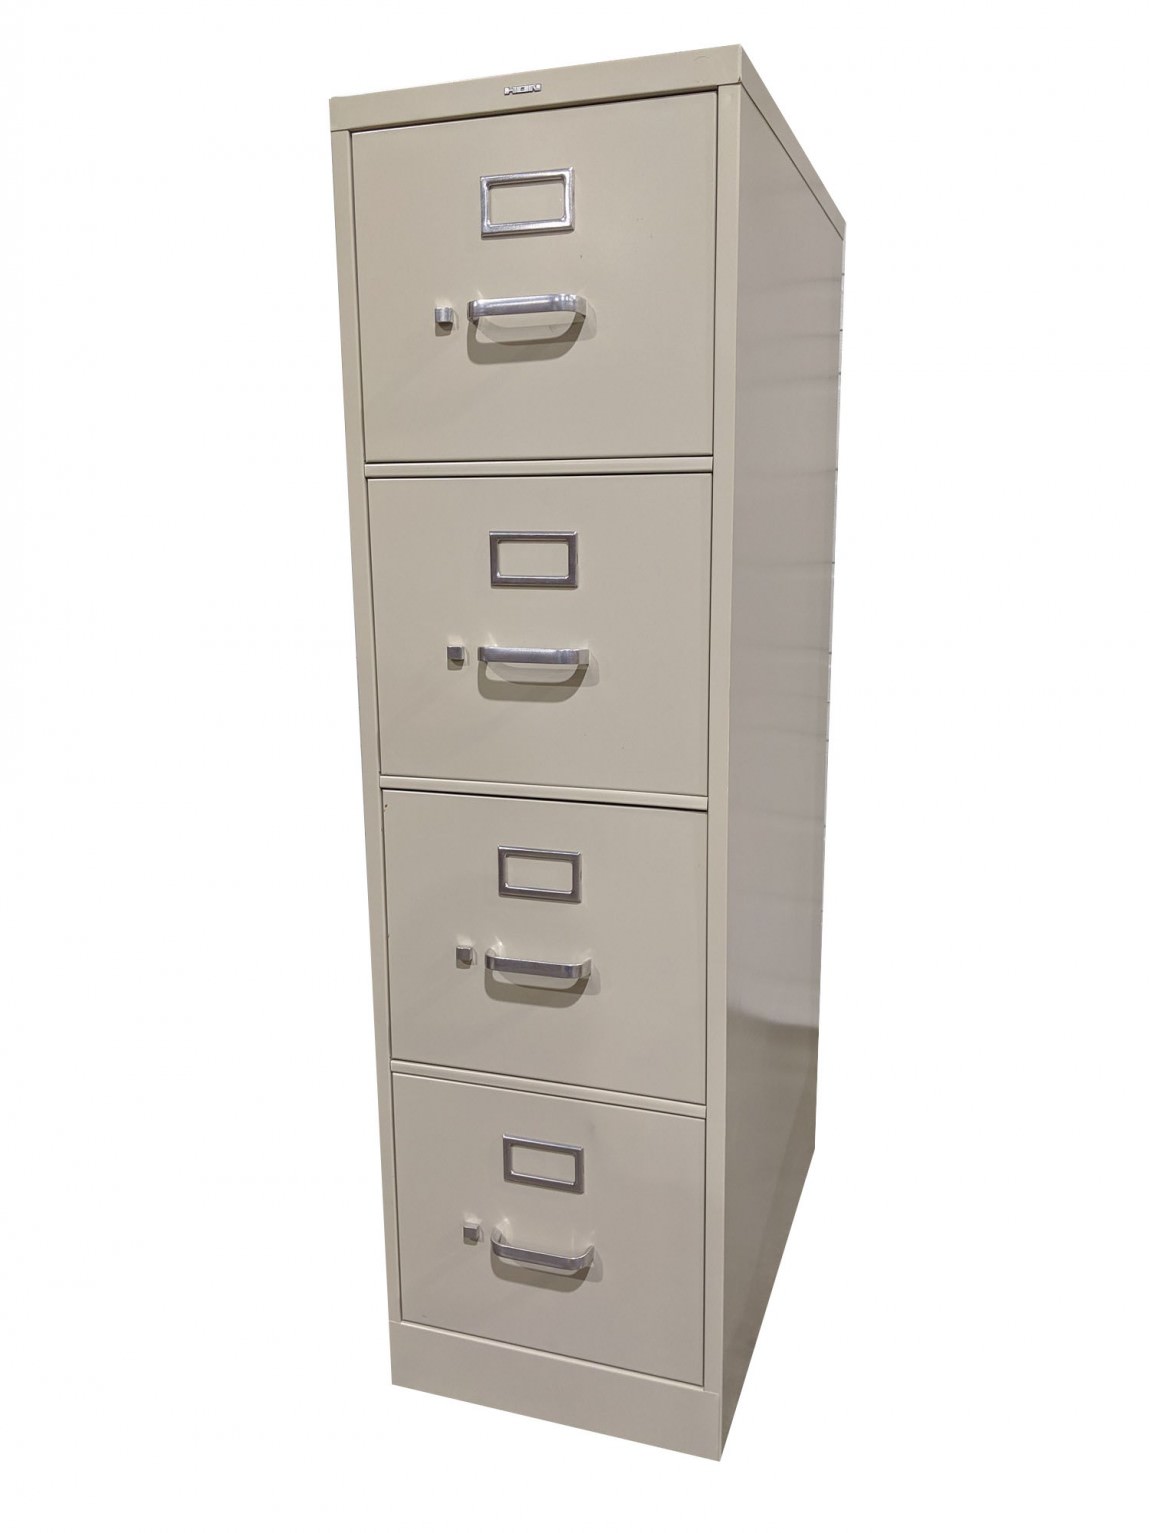 Putty Hon 4 Drawer Vertical File by Hon